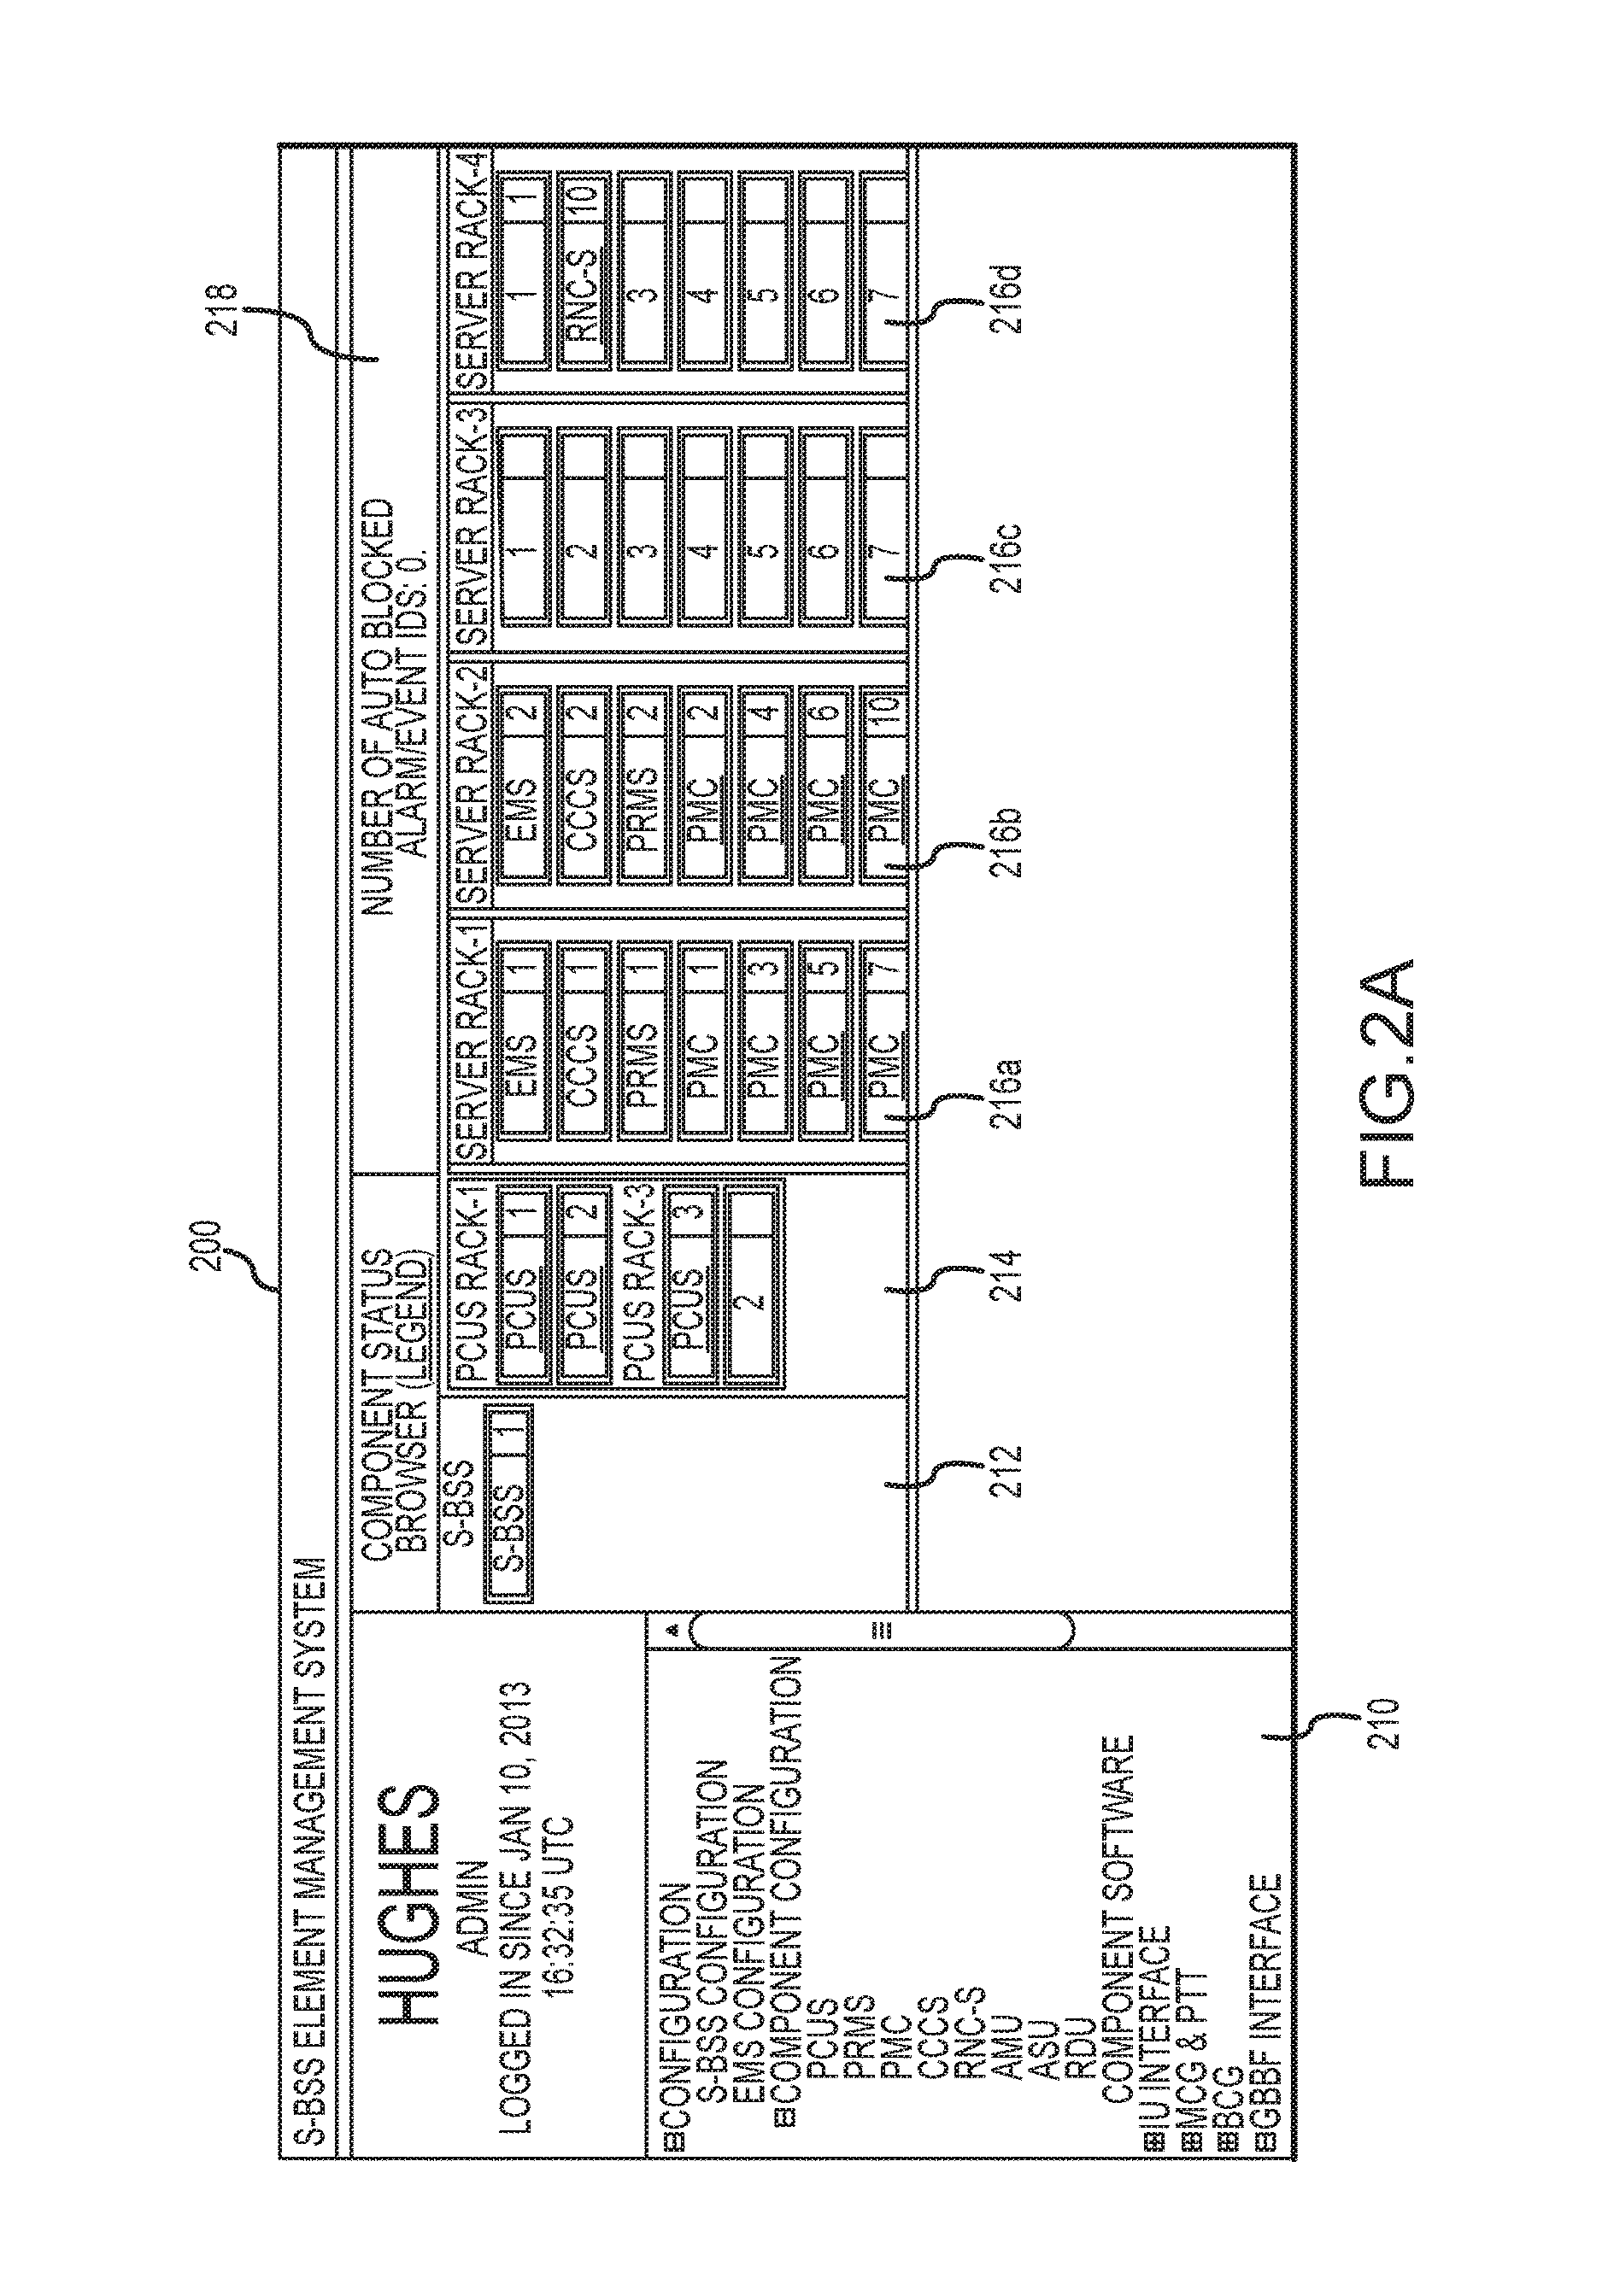 Apparatus and method for inline monitoring of transmission signals